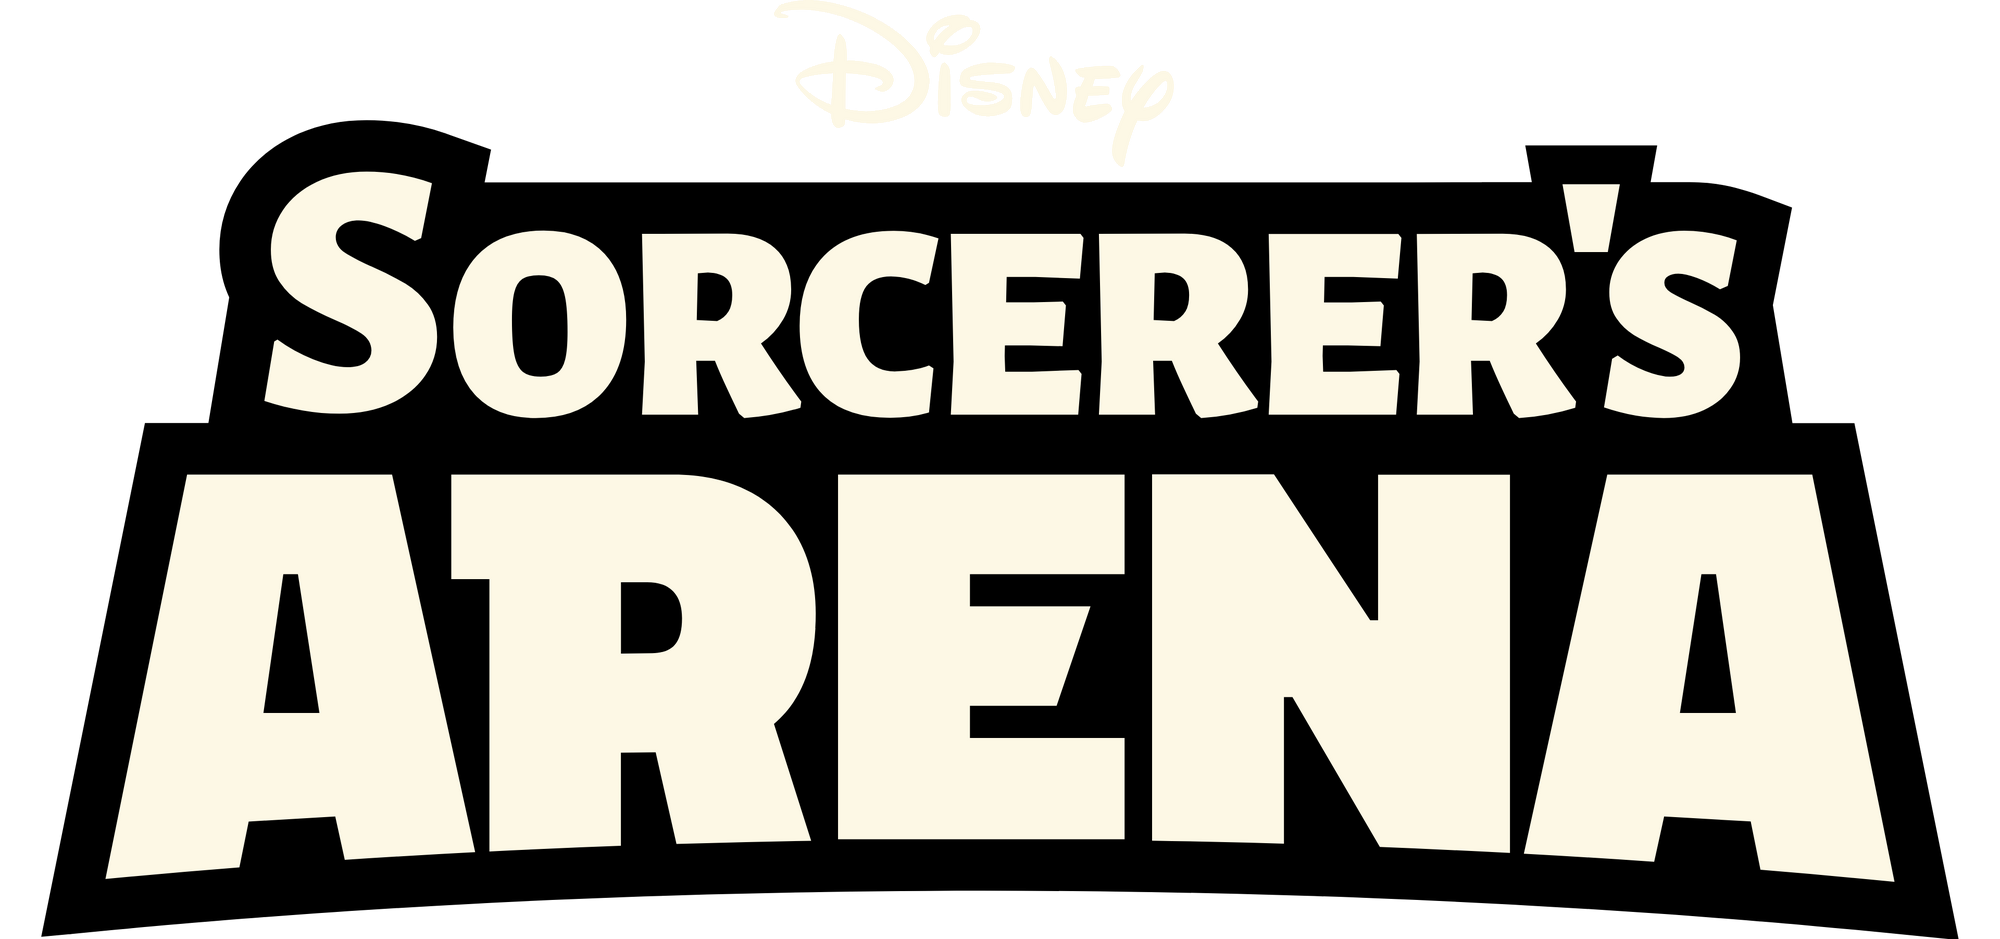 Disney Sorcerers Arena Disney Wiki Fandom Powered By Wikia - trolling criminals as a penguin supersonic fast roblox